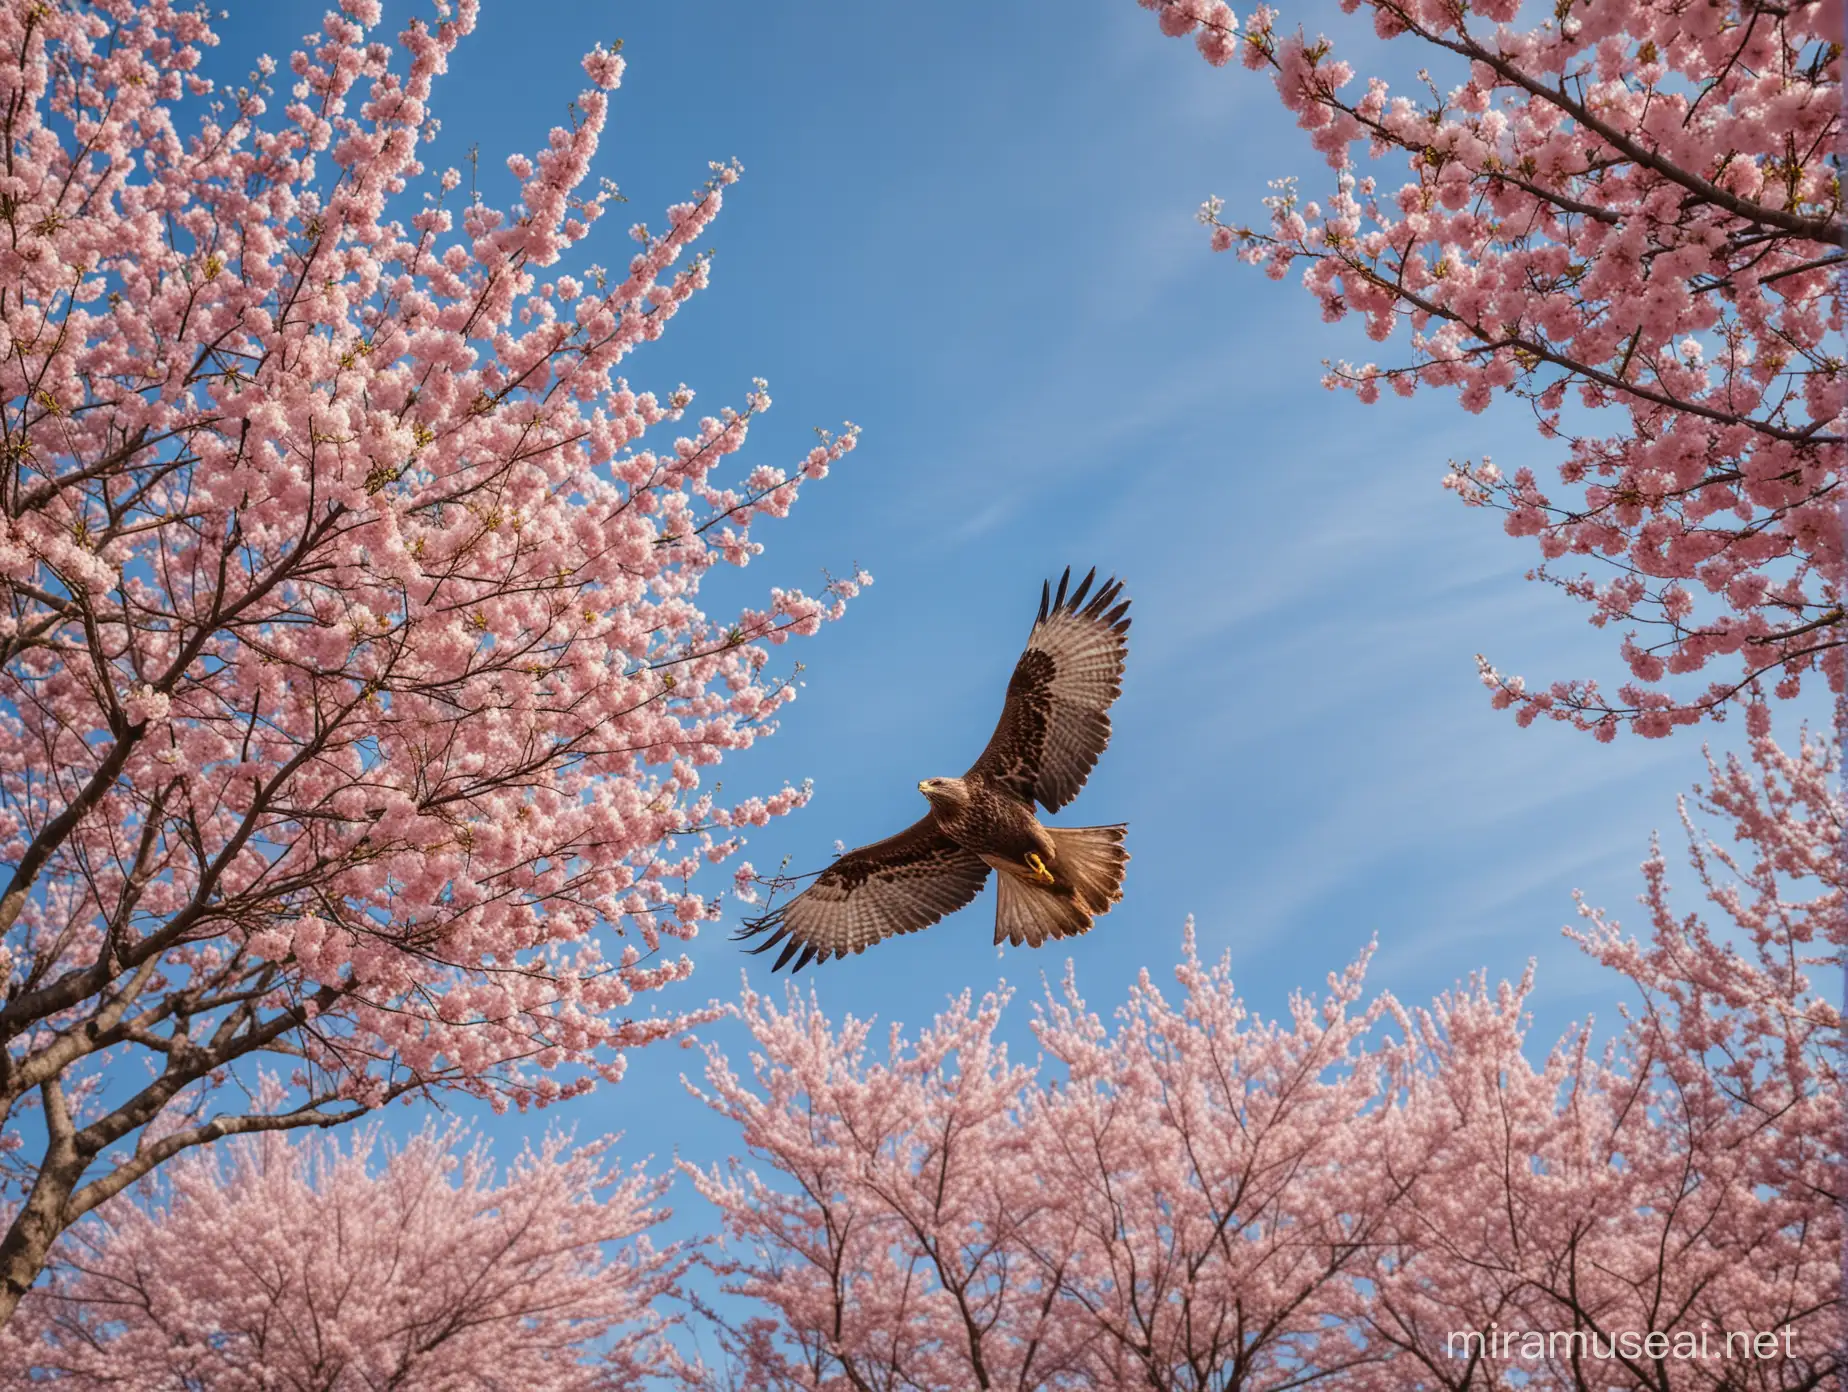 Swooping Buzzard Amidst Vibrant Cherry Blossoms